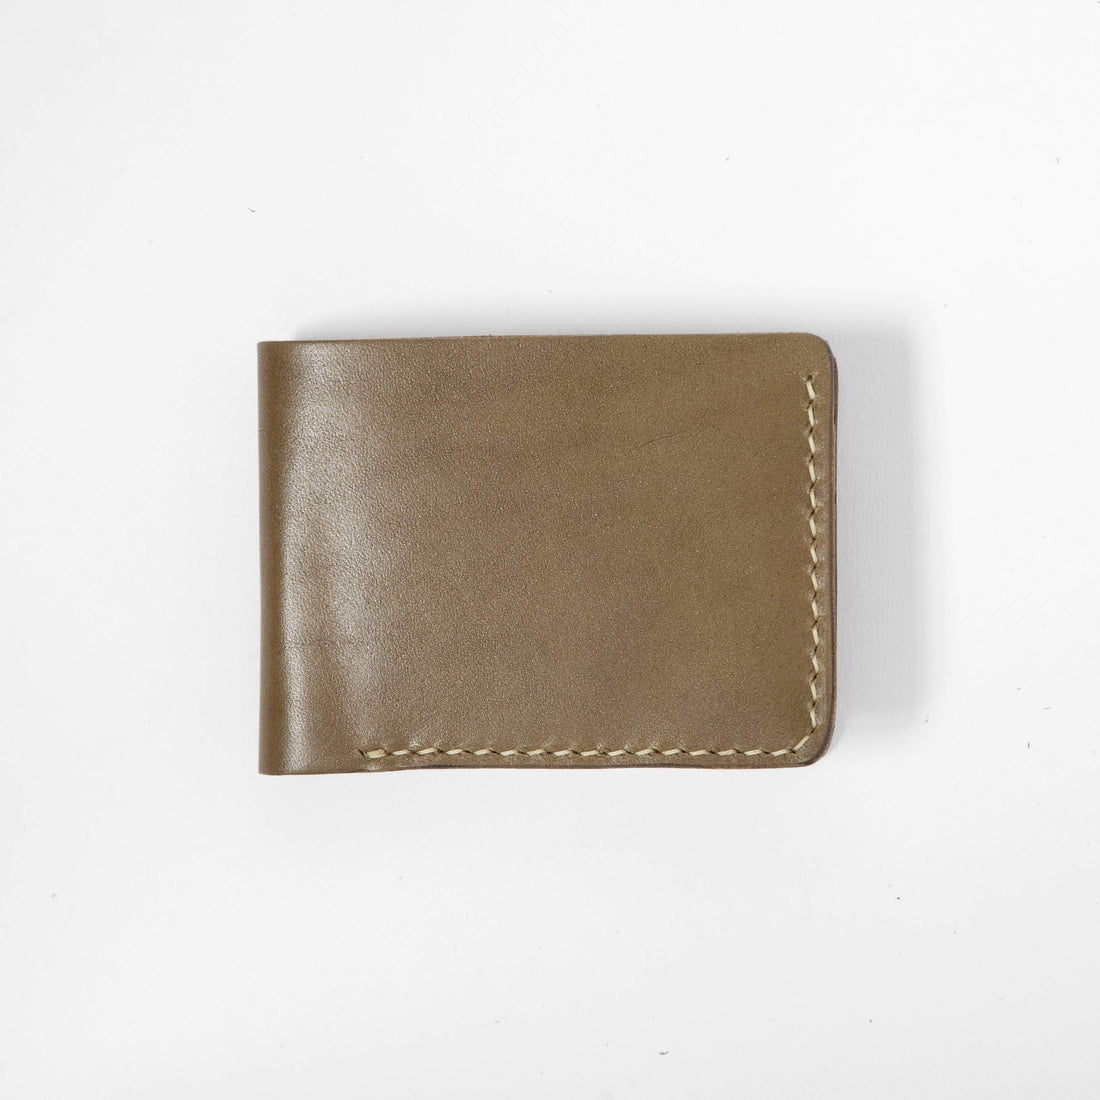 Bridle Leather Wallet